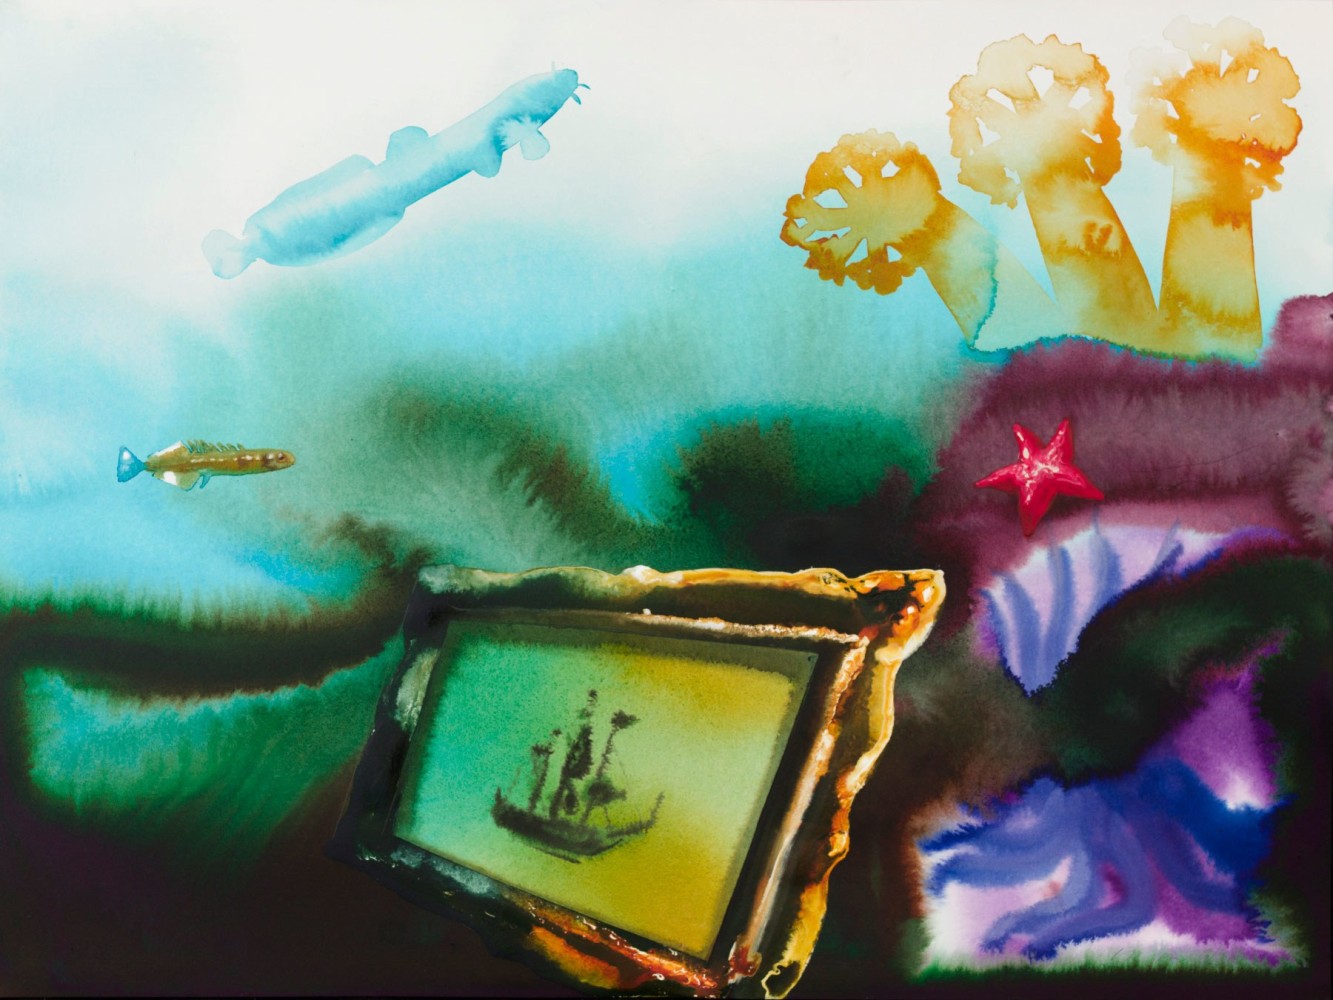 Alexis&amp;nbsp;Rockman

Abraham Storck&amp;#39;s Study For Man of War, 2020

watercolor and acrylic on paper

18 x 24 inches (45,7 x 61 cm)
21 1/8 x 27 x 2 inches (53,7 x 68,6 x 5,1 cm) frame

SW 20148